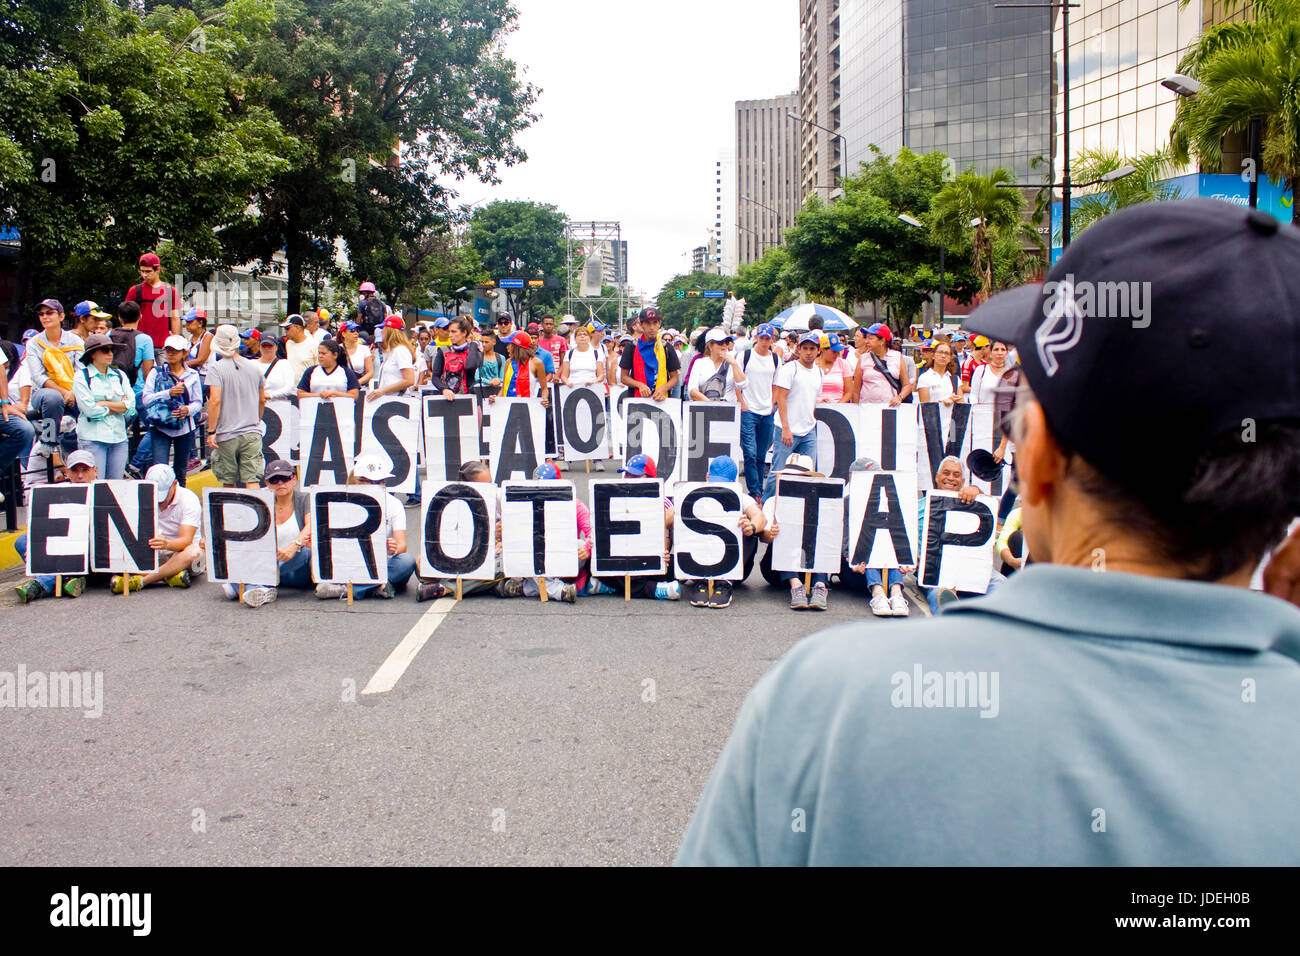 People using cardboard signs protest peacefully on a street in Caracas against the government of Nicolas Maduro. Stock Photo